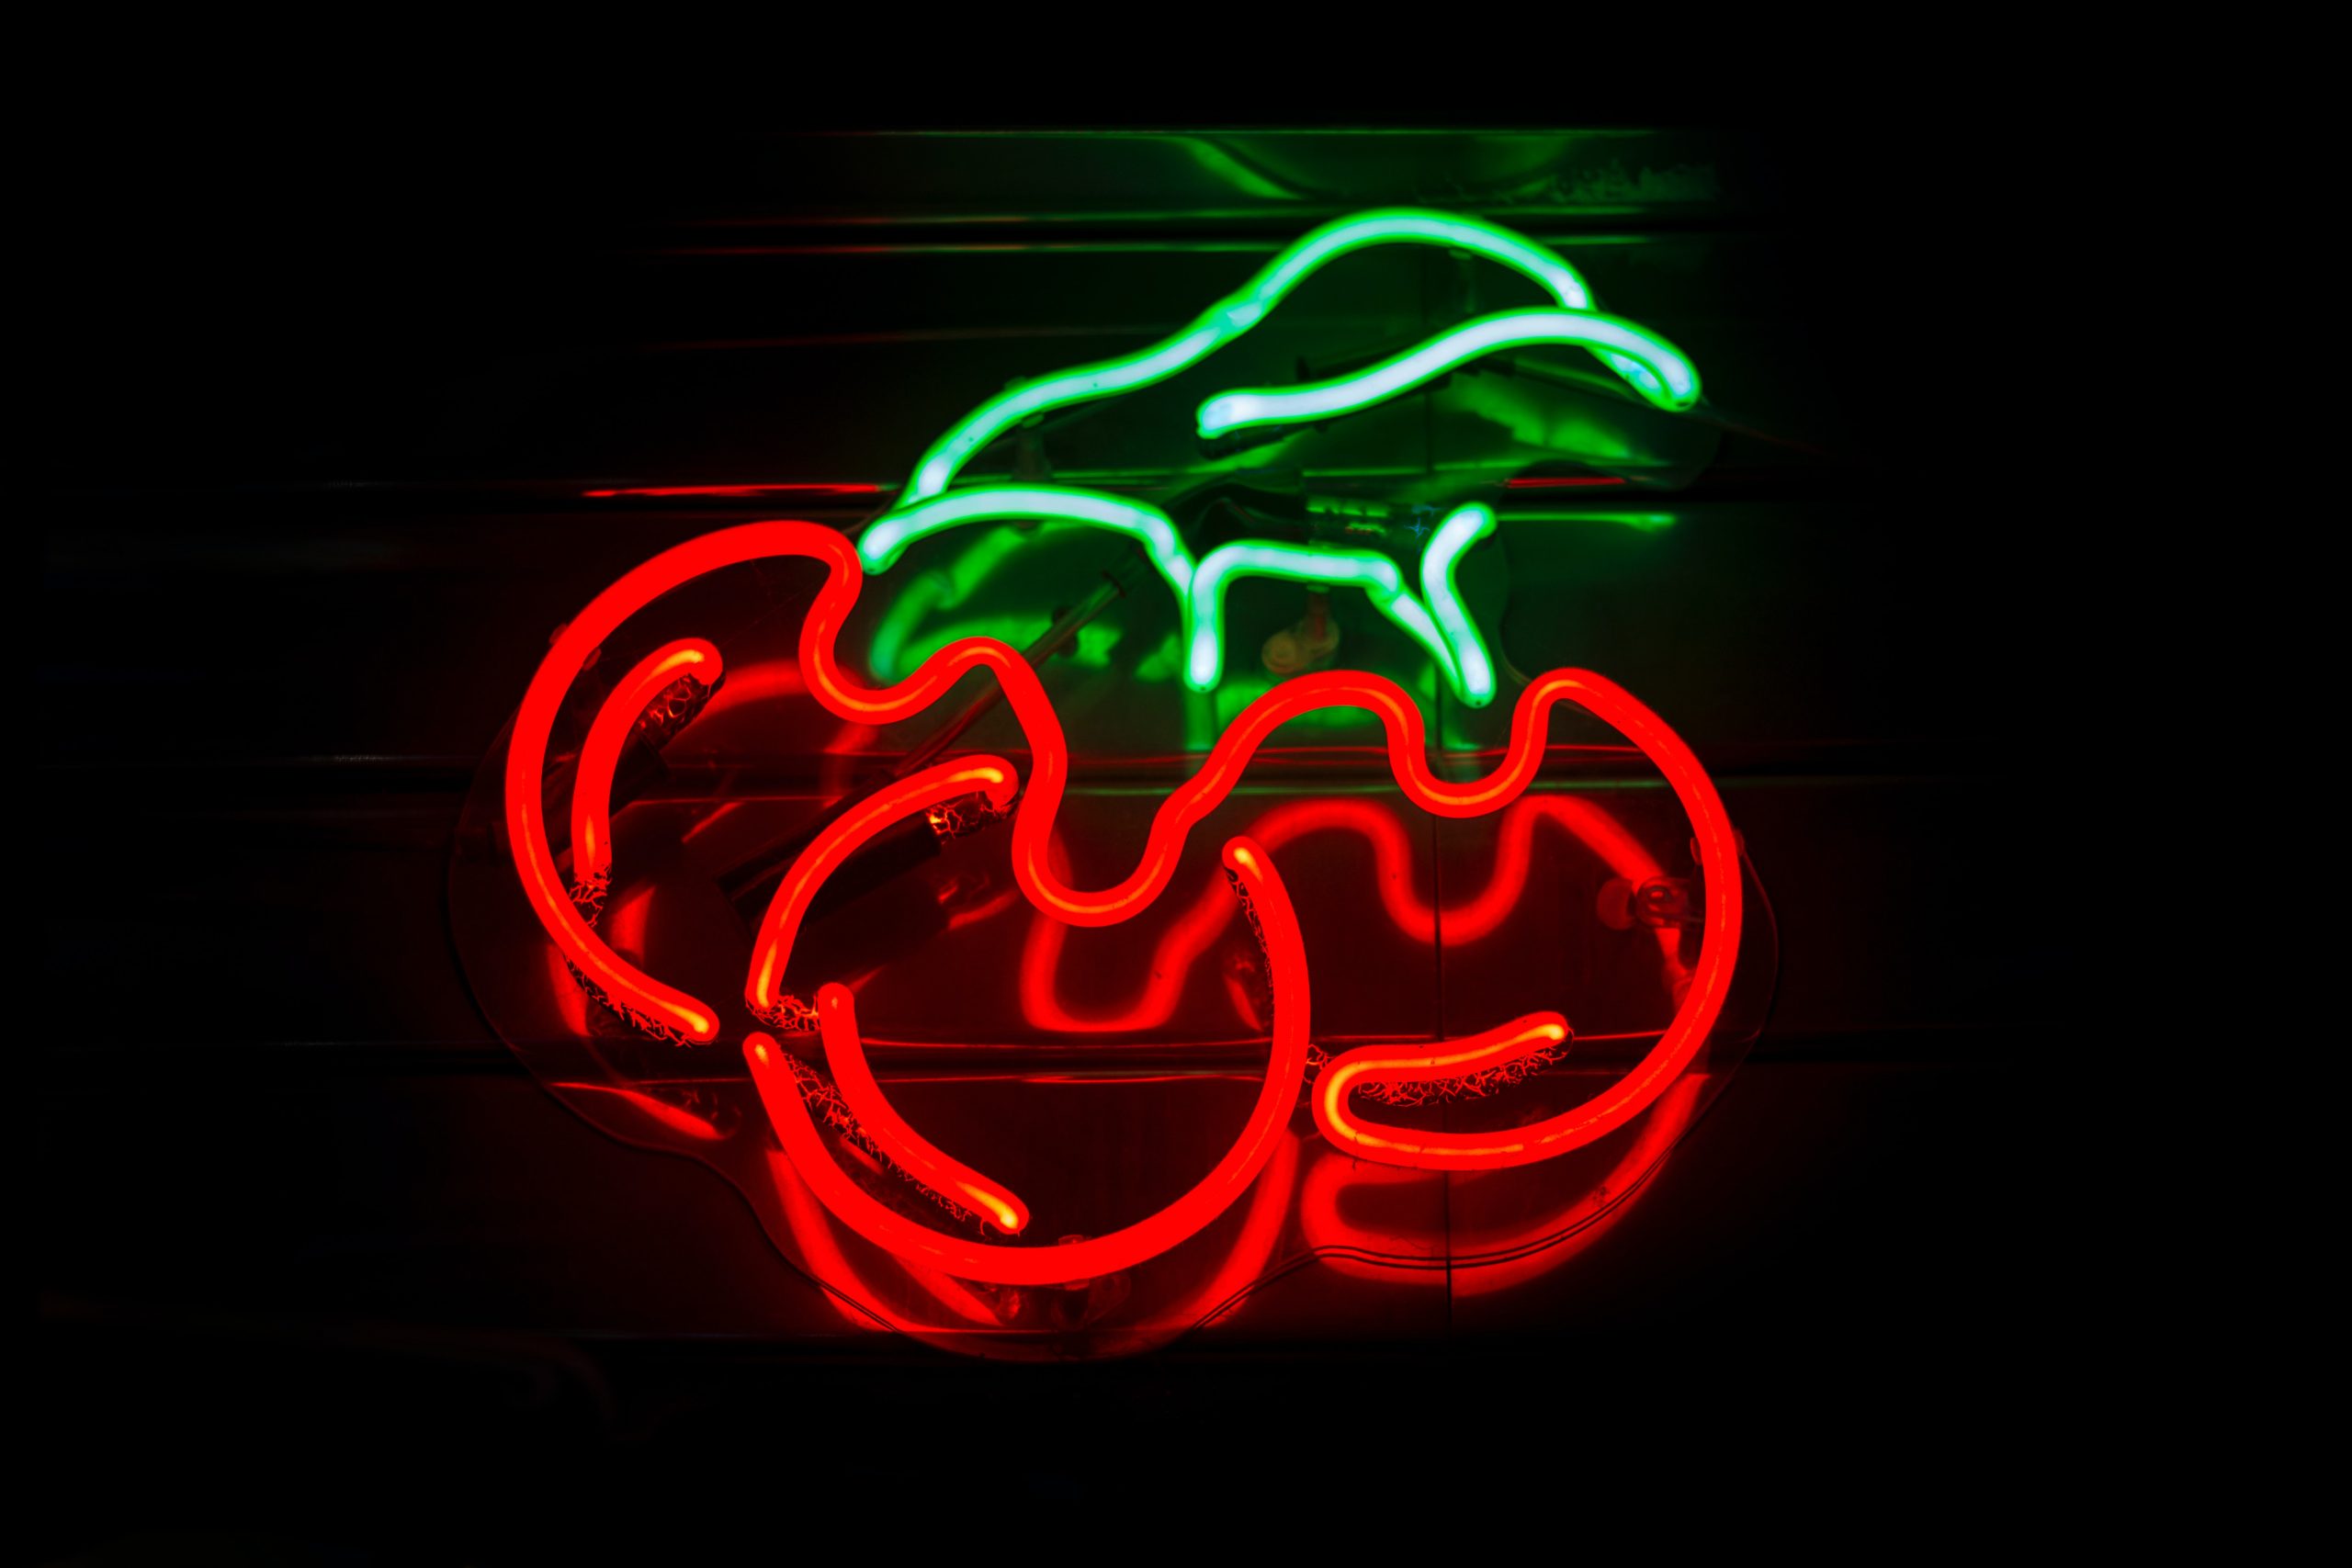 in article about palms bet bonuses, a neon cherry sign